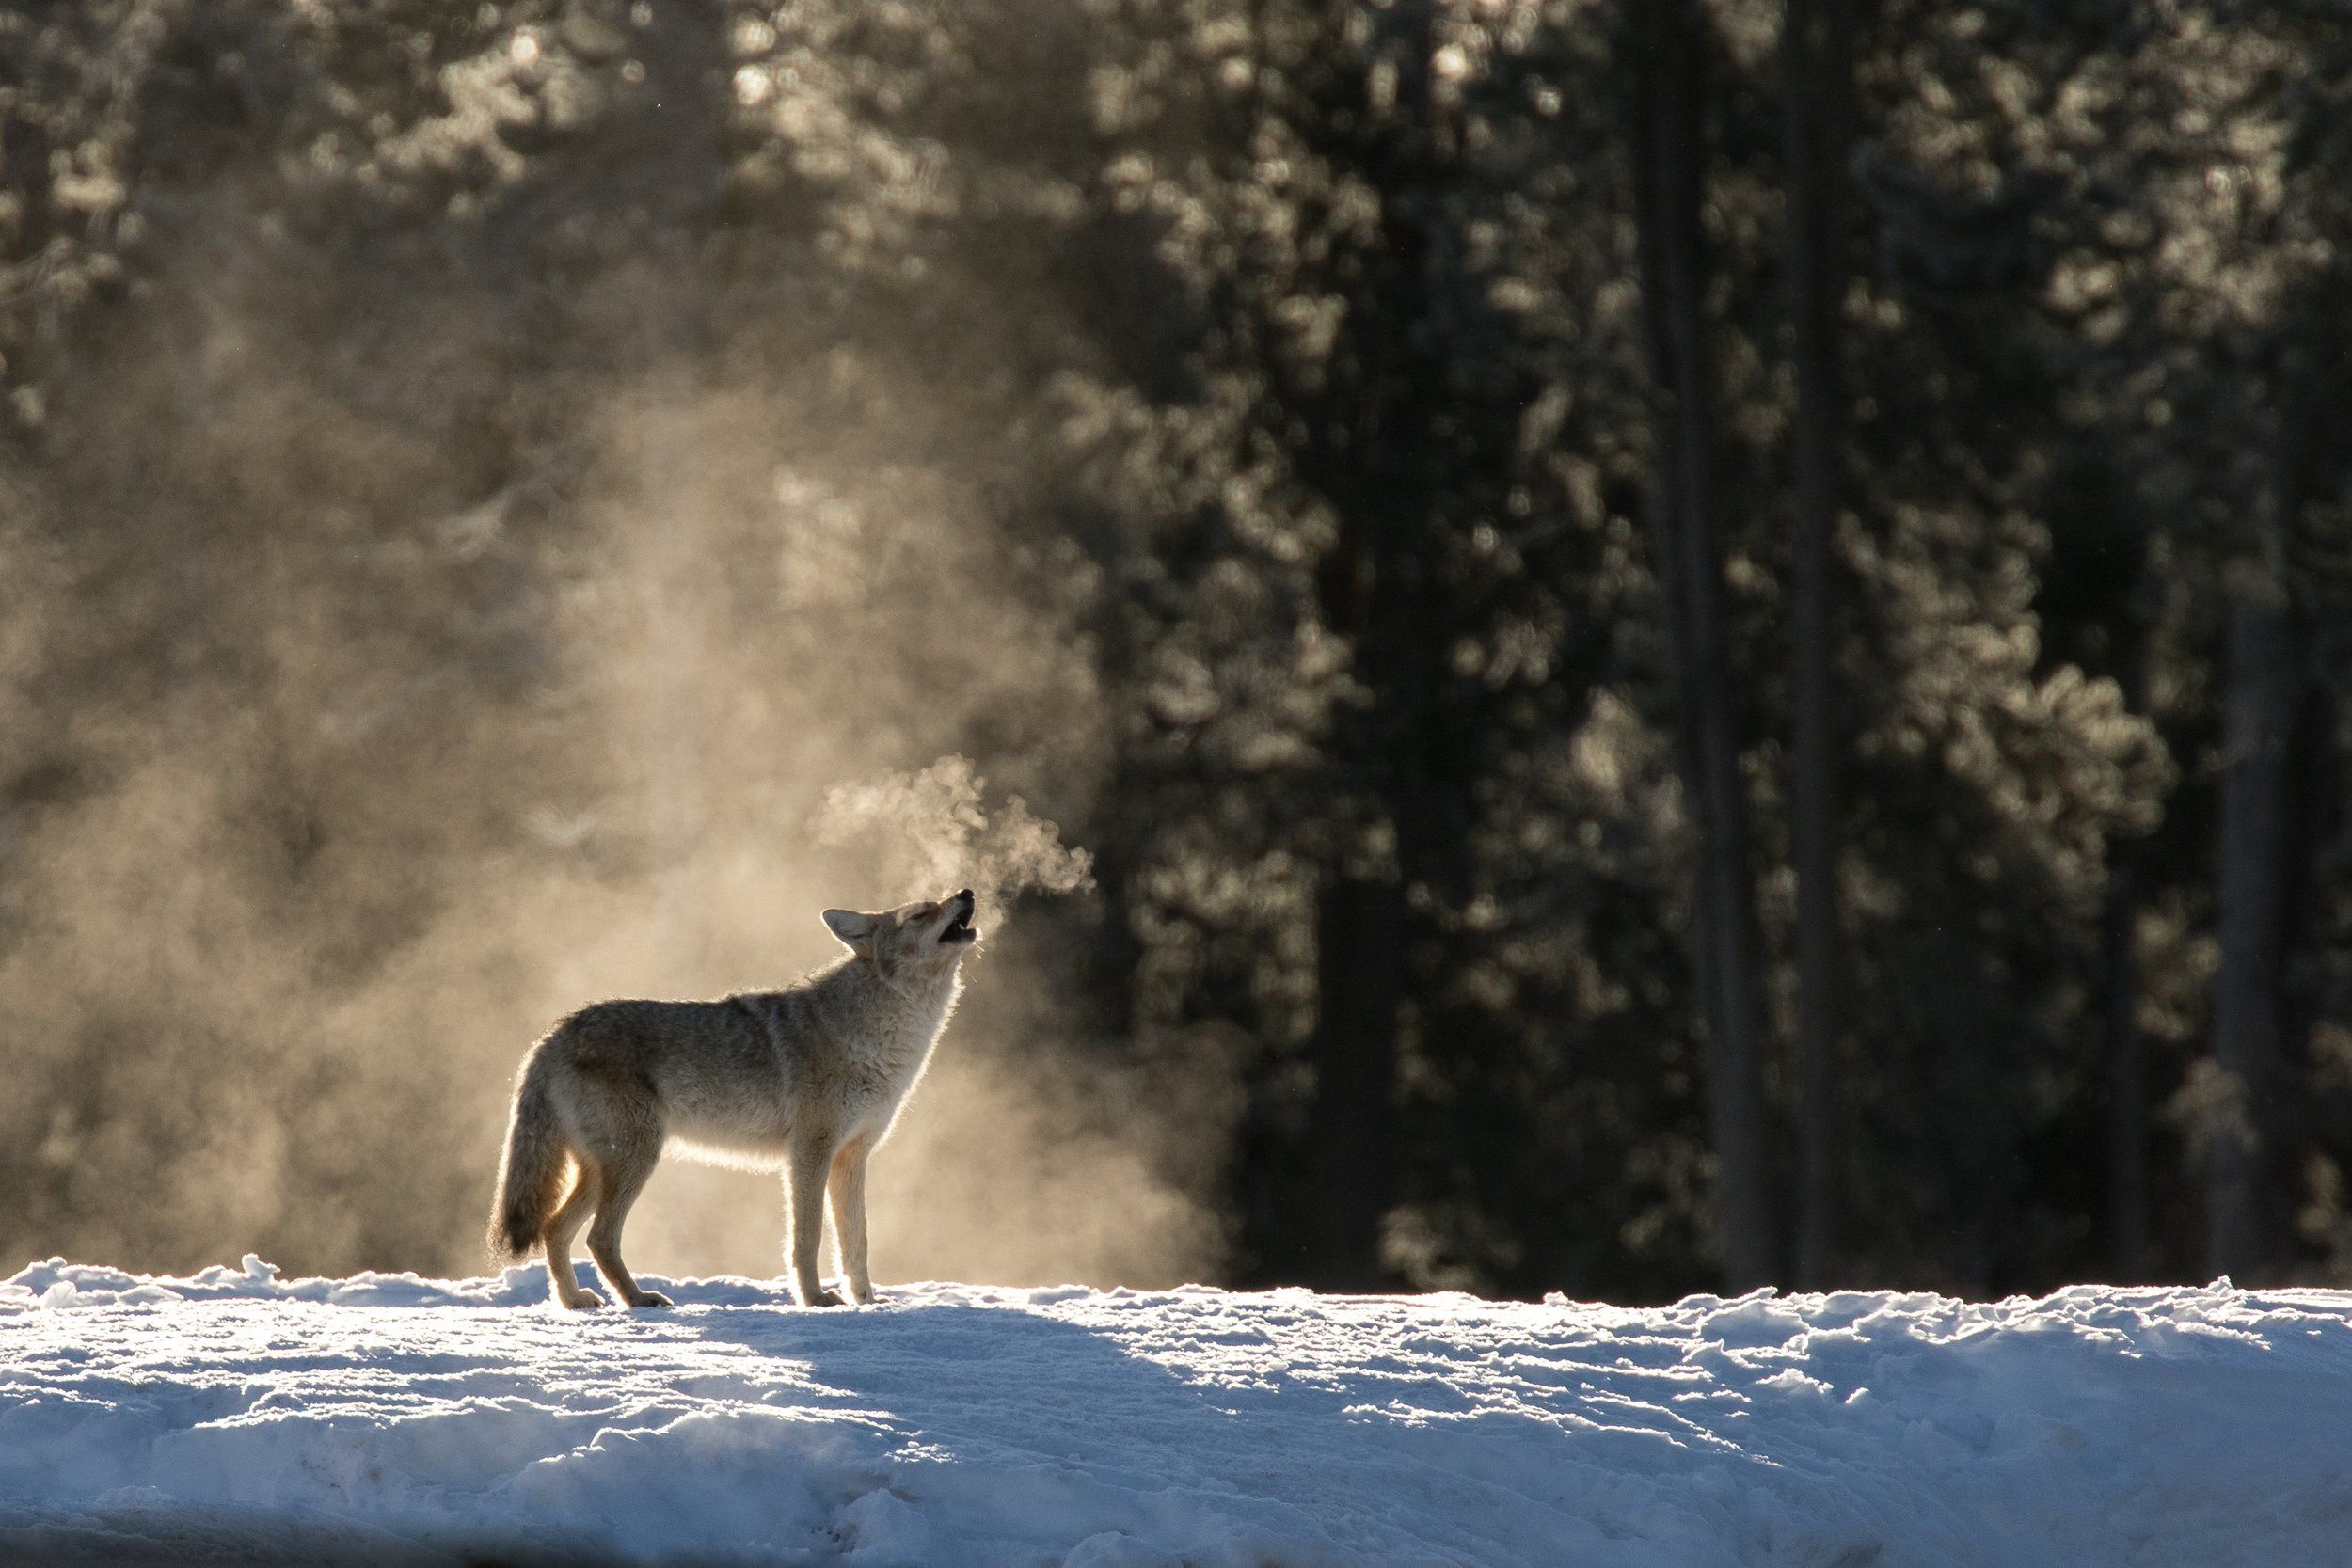 The HuntWise Coyote Hunting Guide